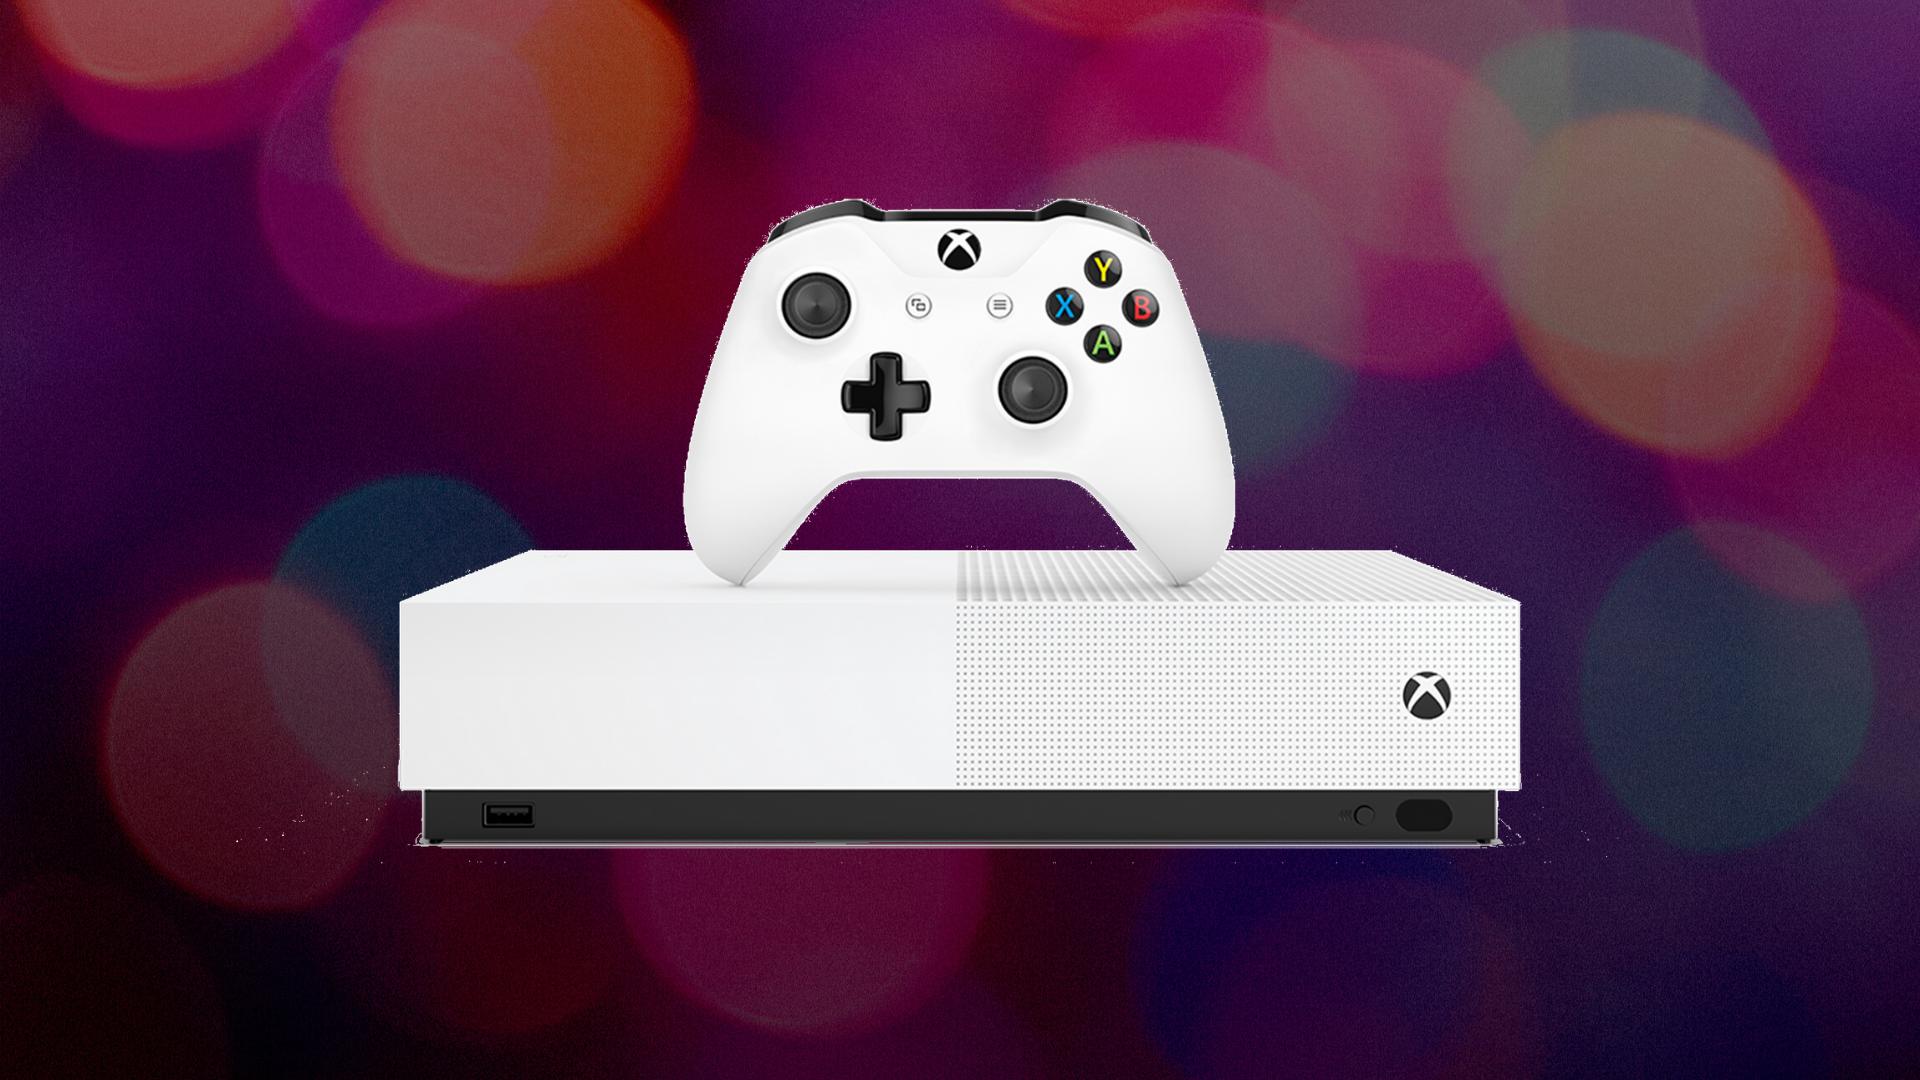 Microsofts Xbox One S All Digital Edition 1tb Is On Sale At Walmart